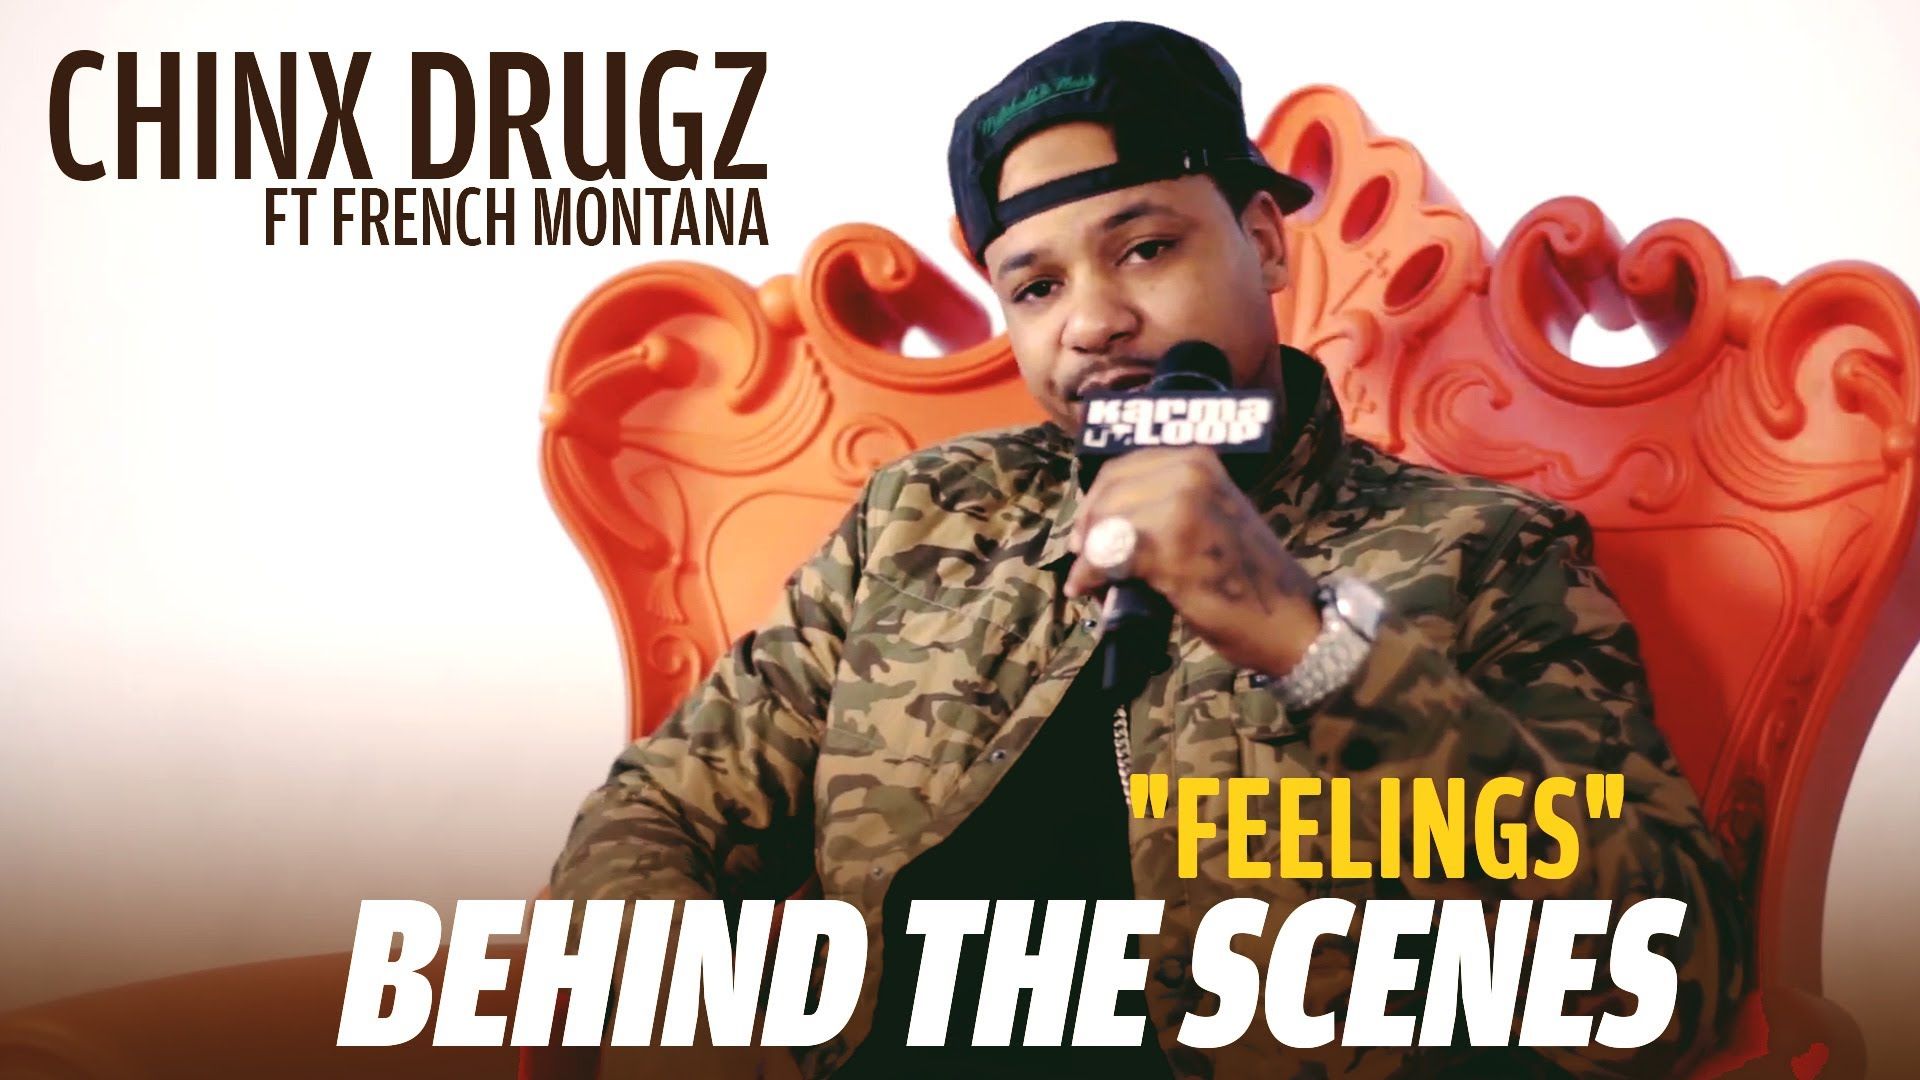 Chinx ft. French Montana Feelings Music Video BTS - YouTube